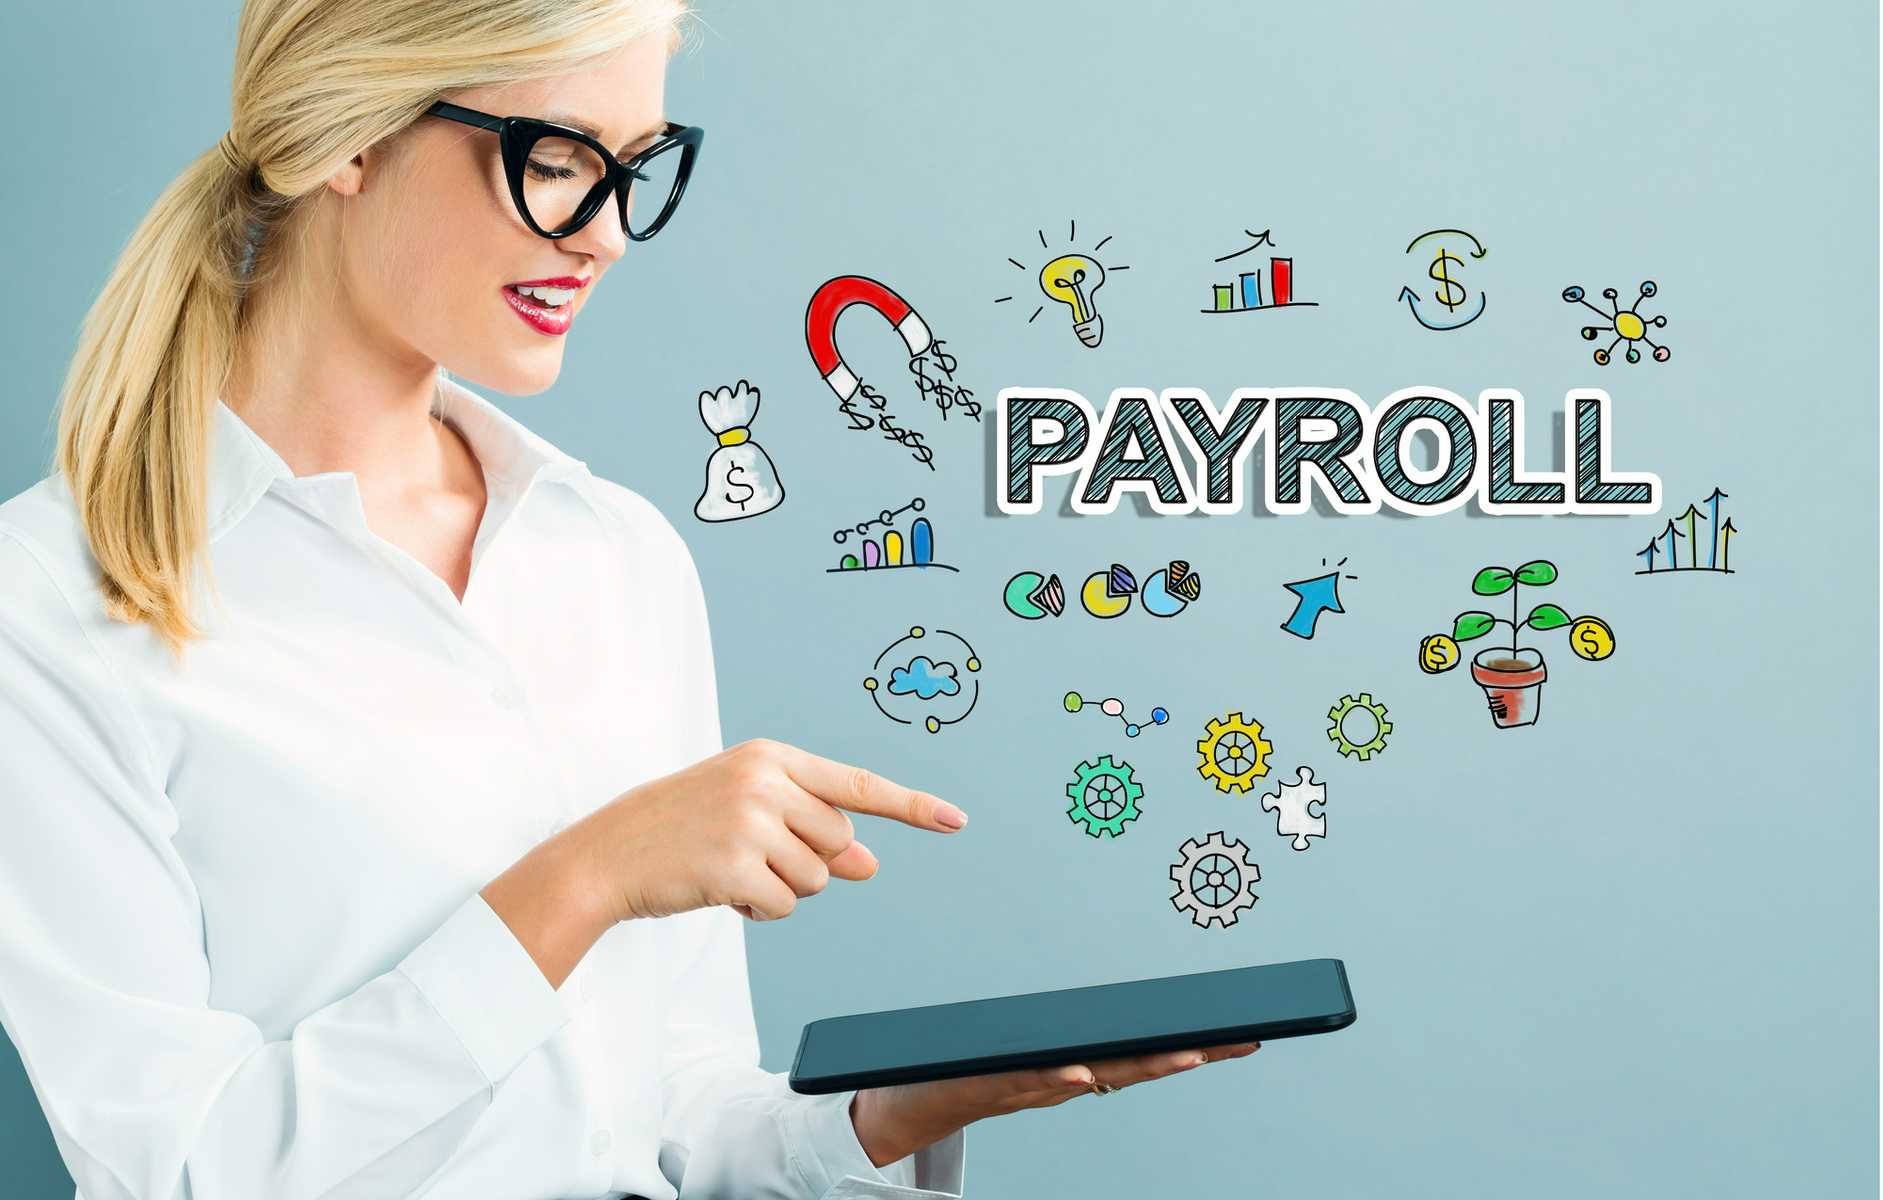 What Is Payroll